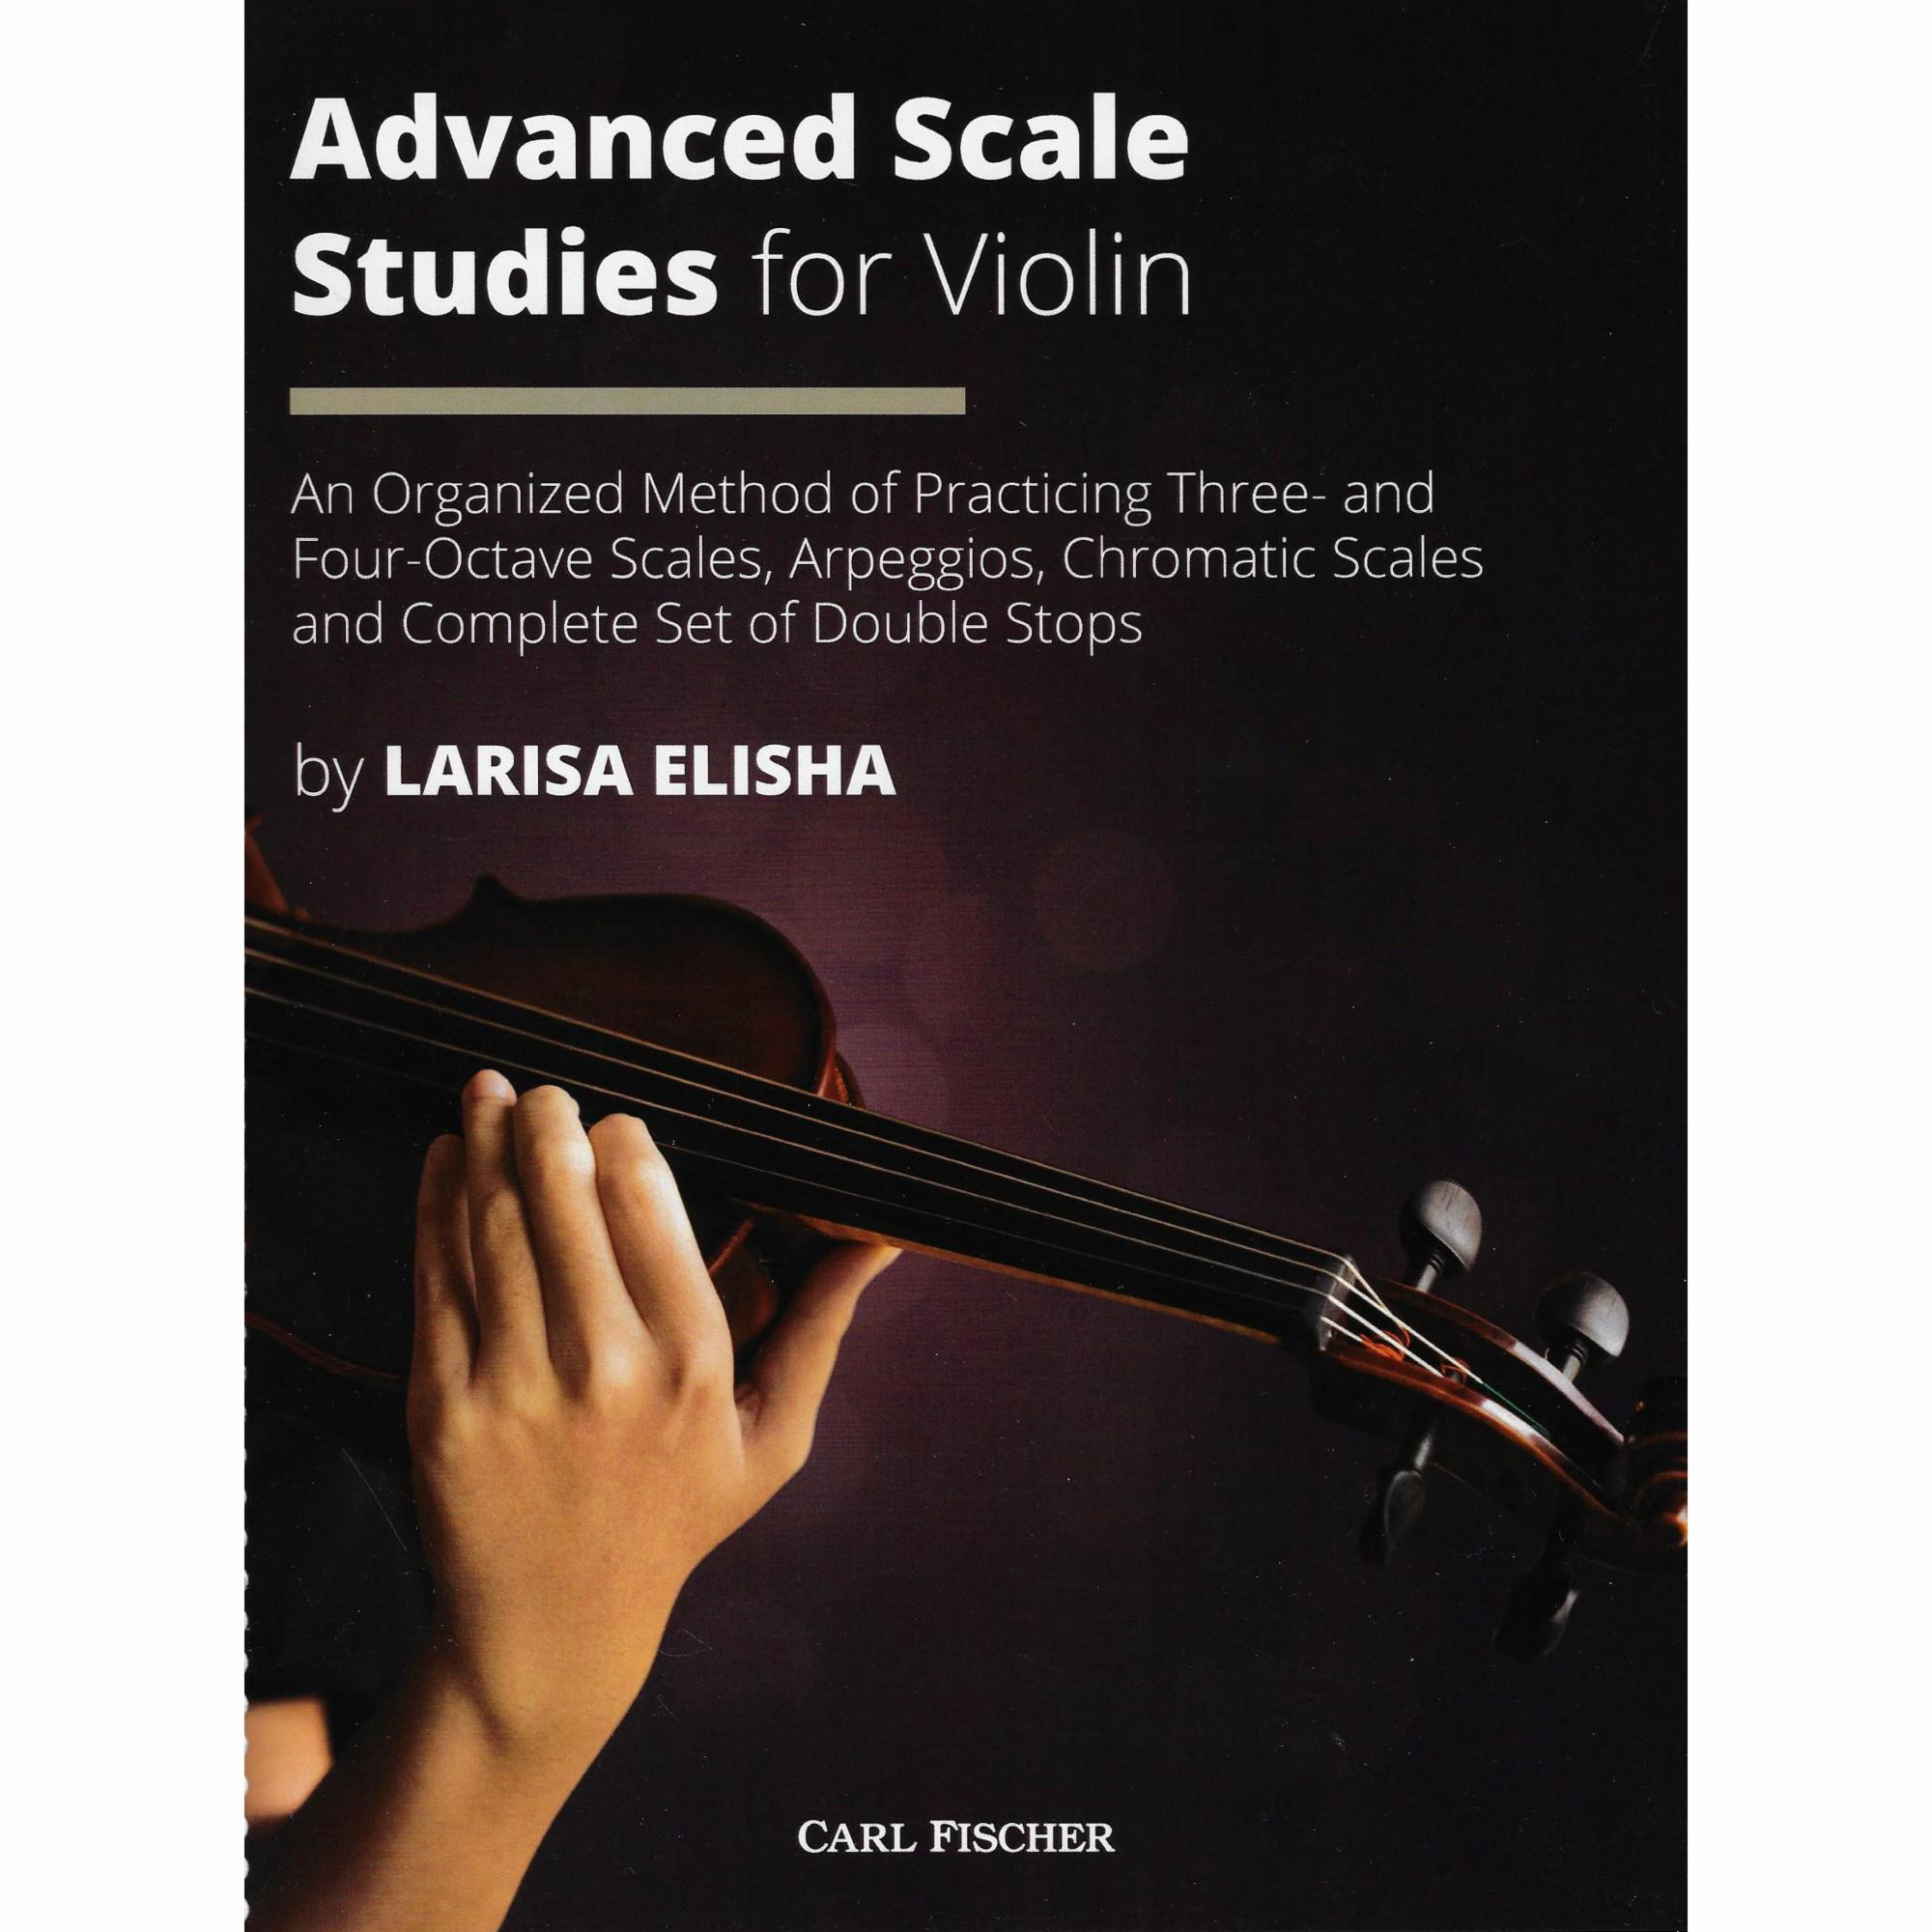 Advanced Scales Studies for Violin